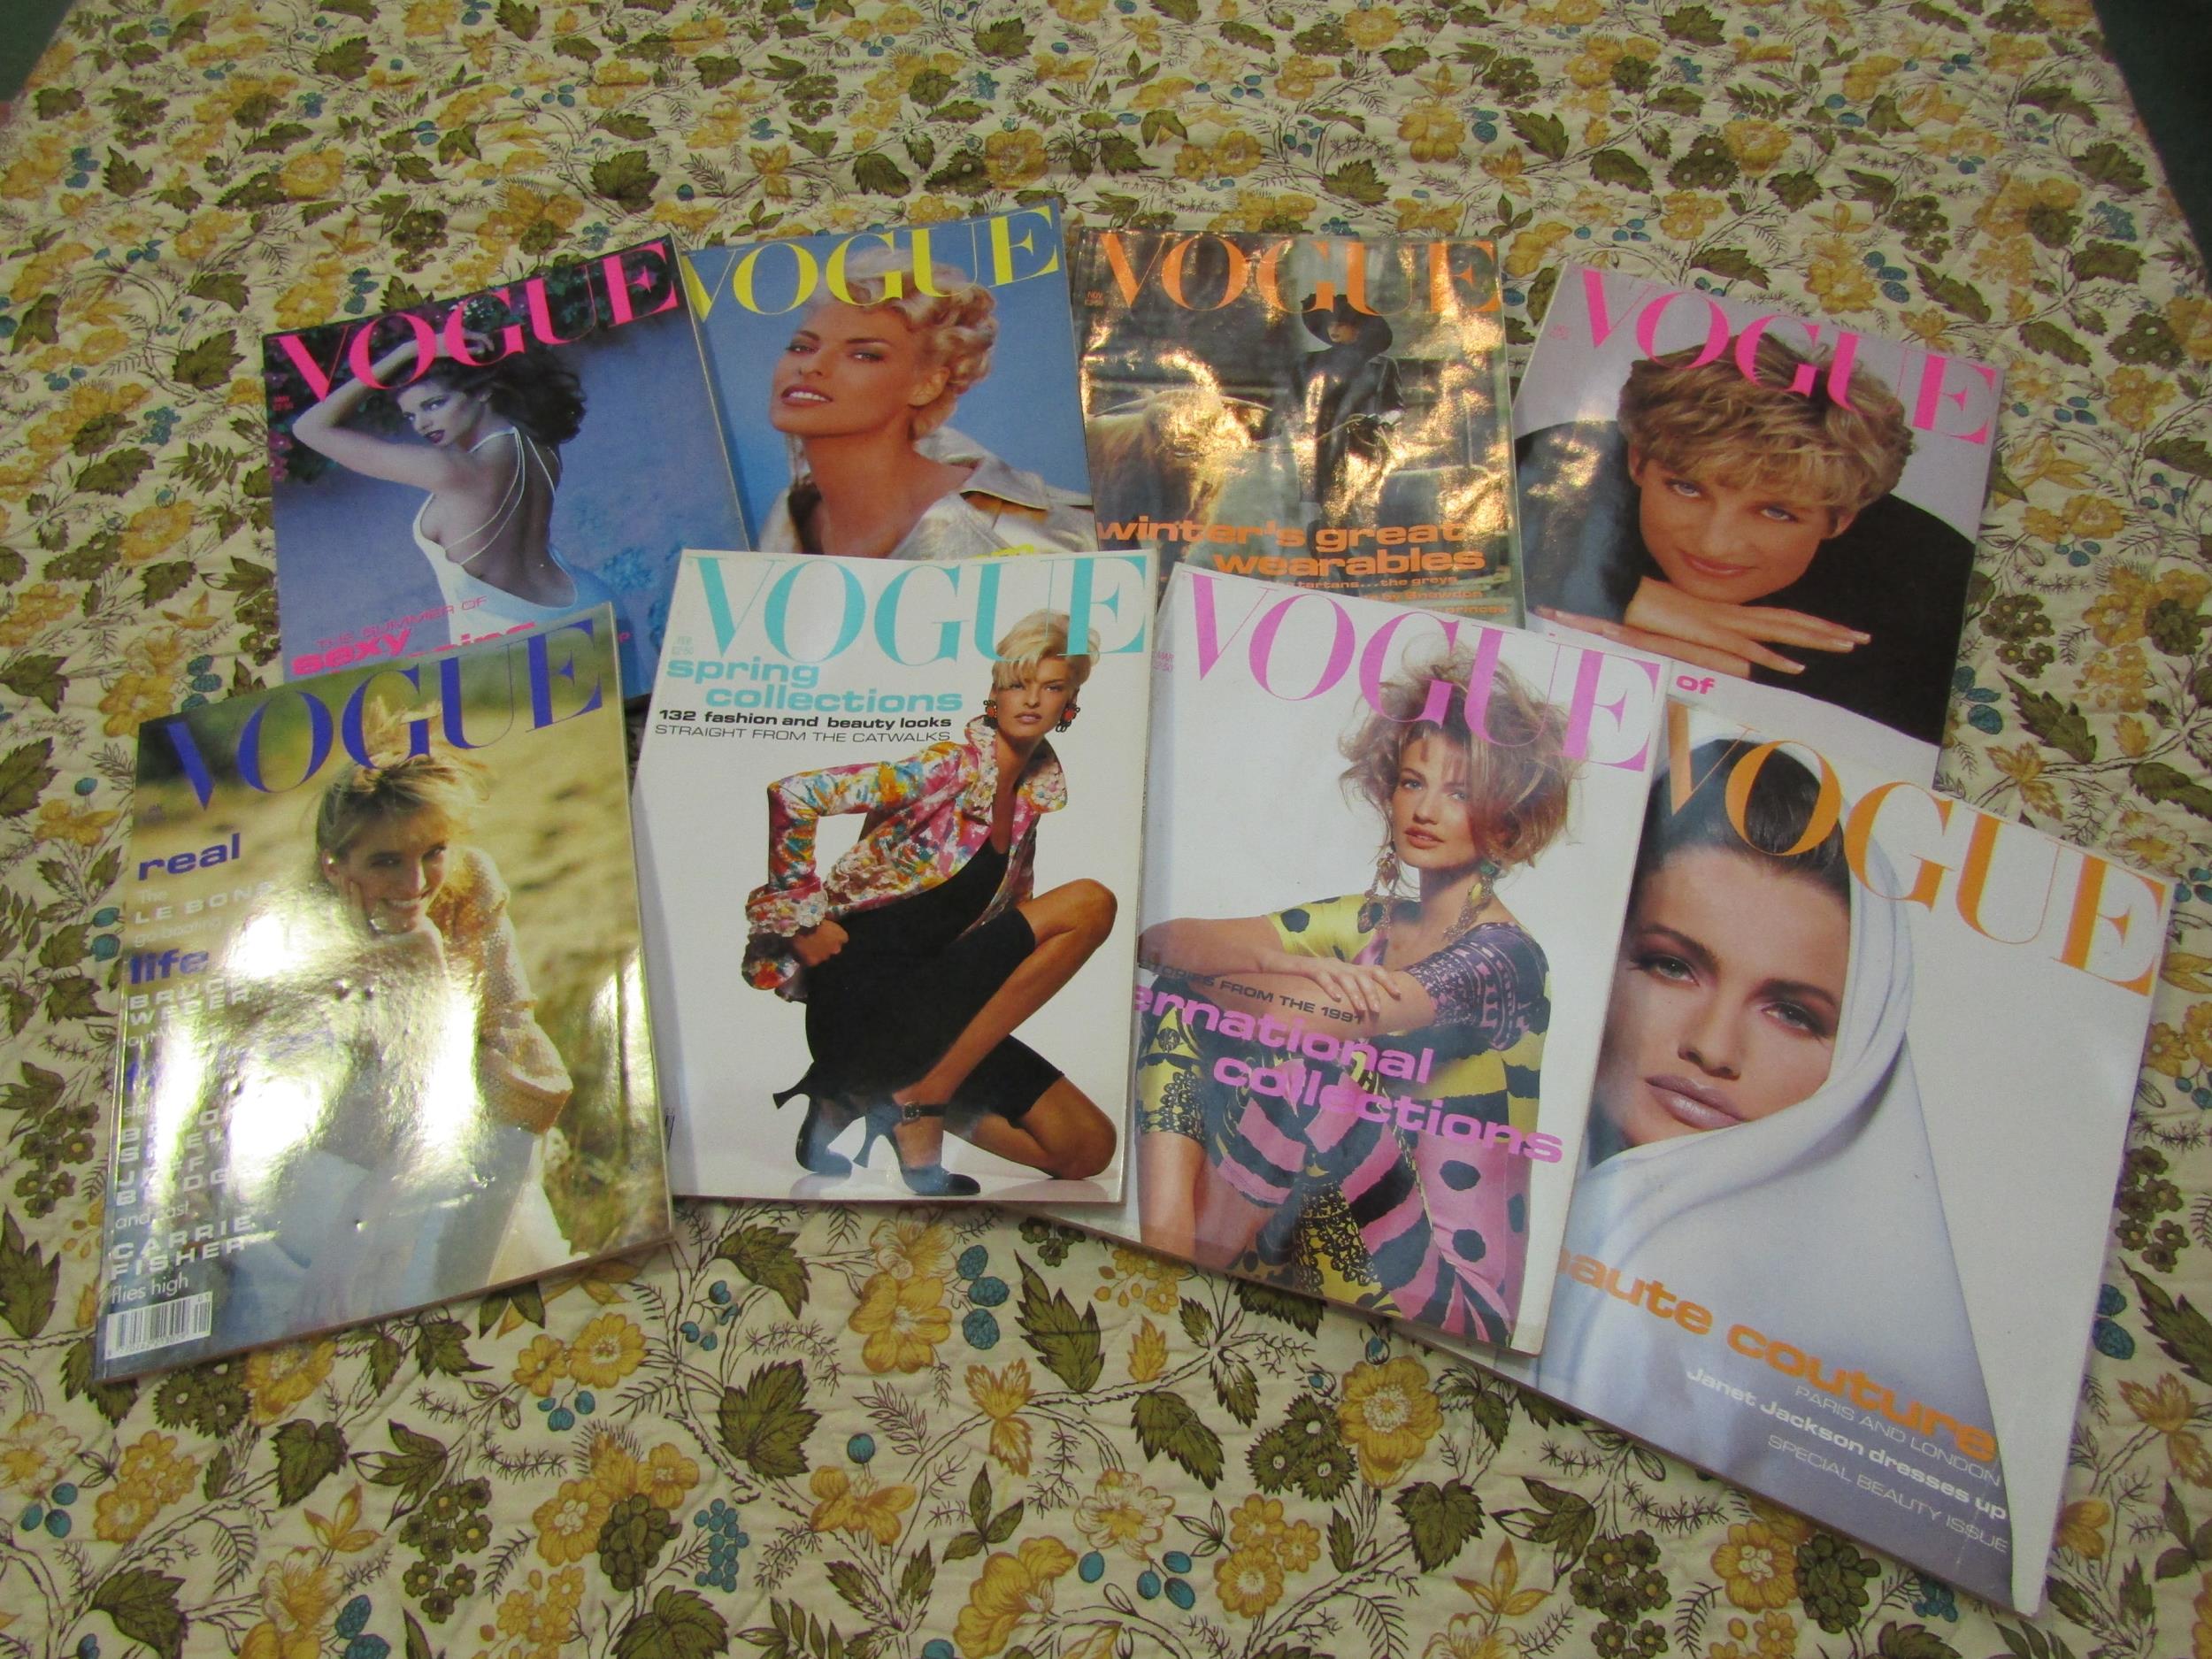 British Vogue magazine 1980 - January (1), February (2), March 1st (3), March 15th (4), April 1st ( - Image 22 of 40